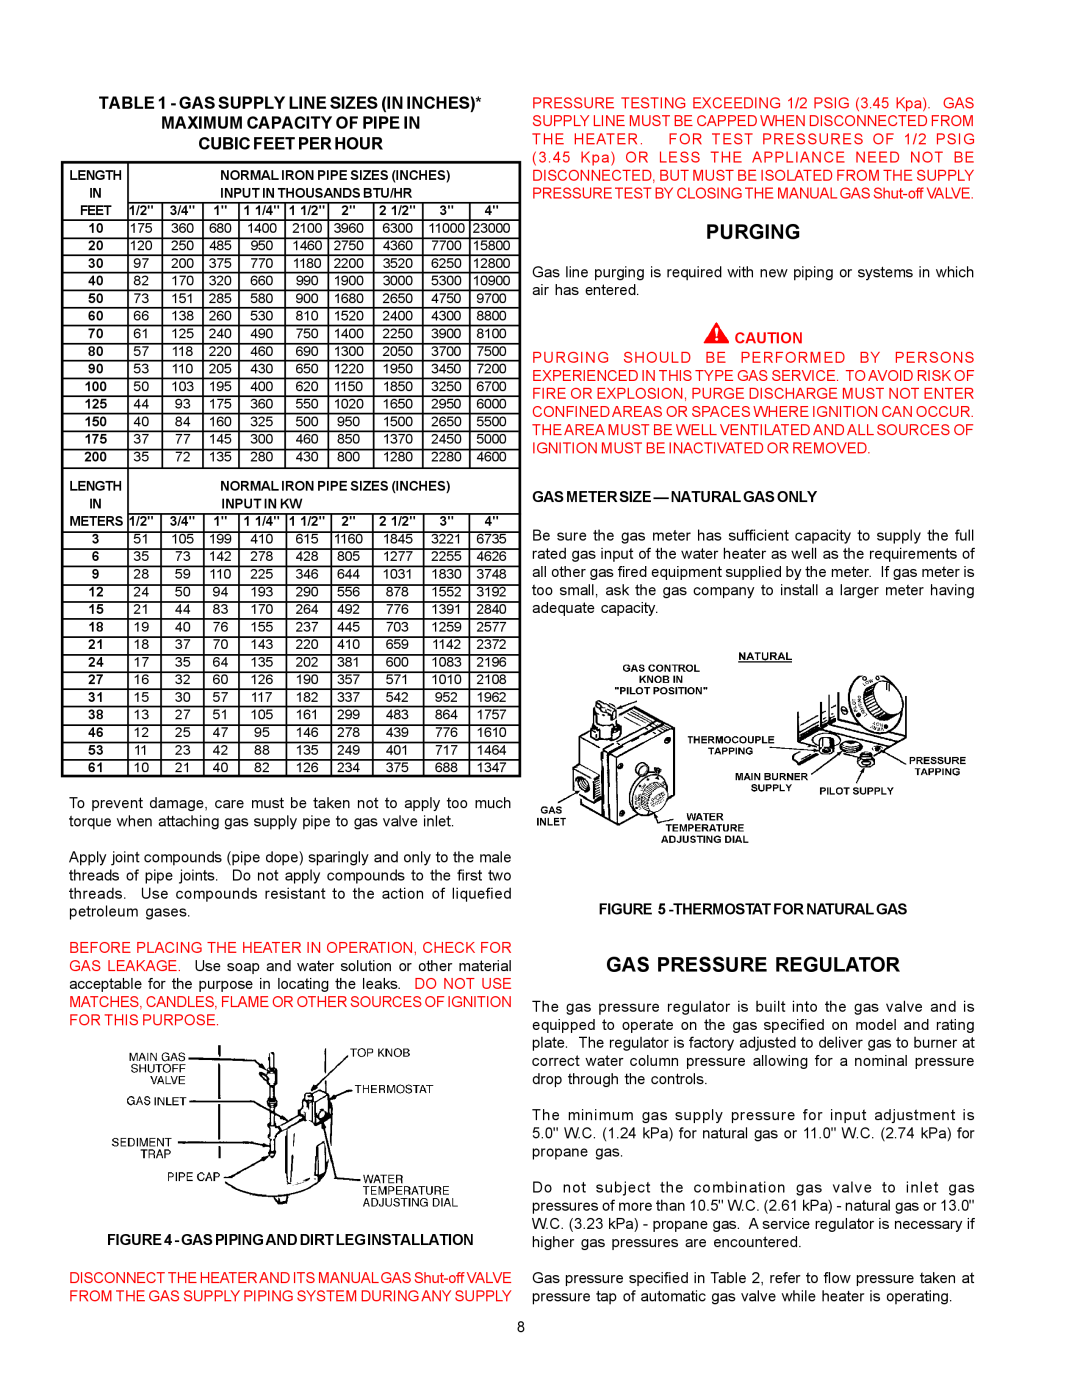 A.O. Smith BT- 65 warranty Purging, Gas Pressure Regulator, Gas Supply Line Sizes In Inches Maximum Capacity Of Pipe In 